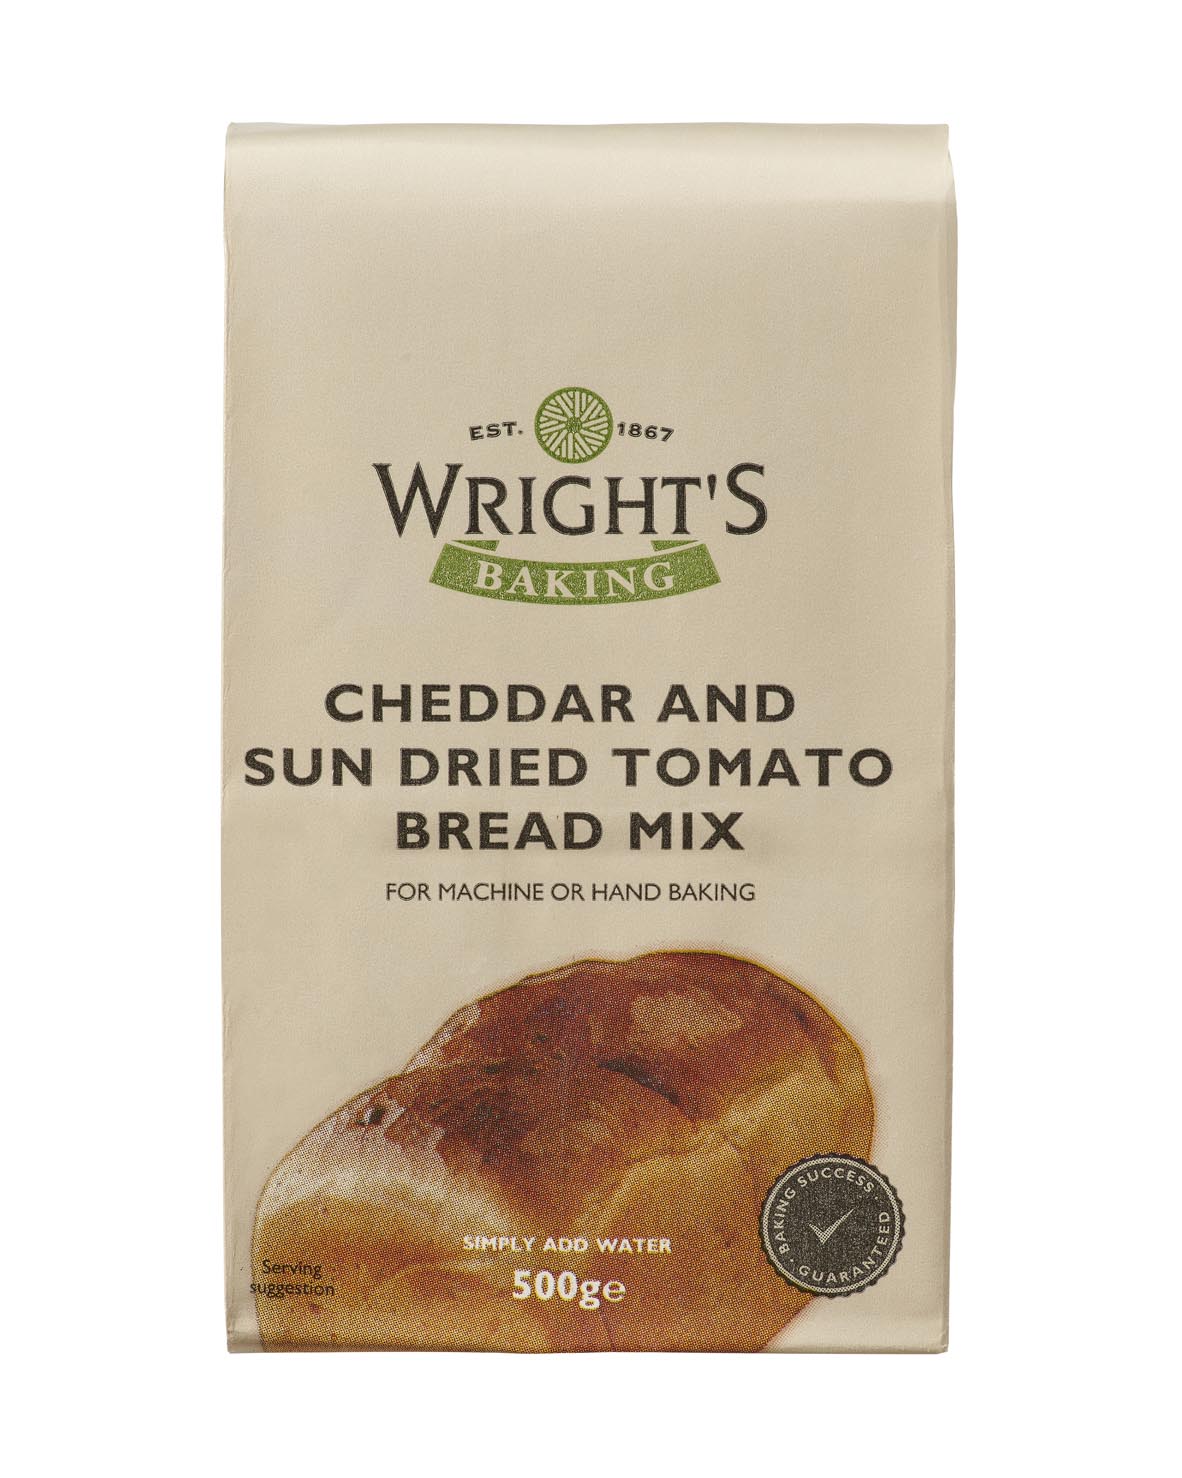 Cheddar Cheese & Sundried Tomato Bread Mix 5 x 500g